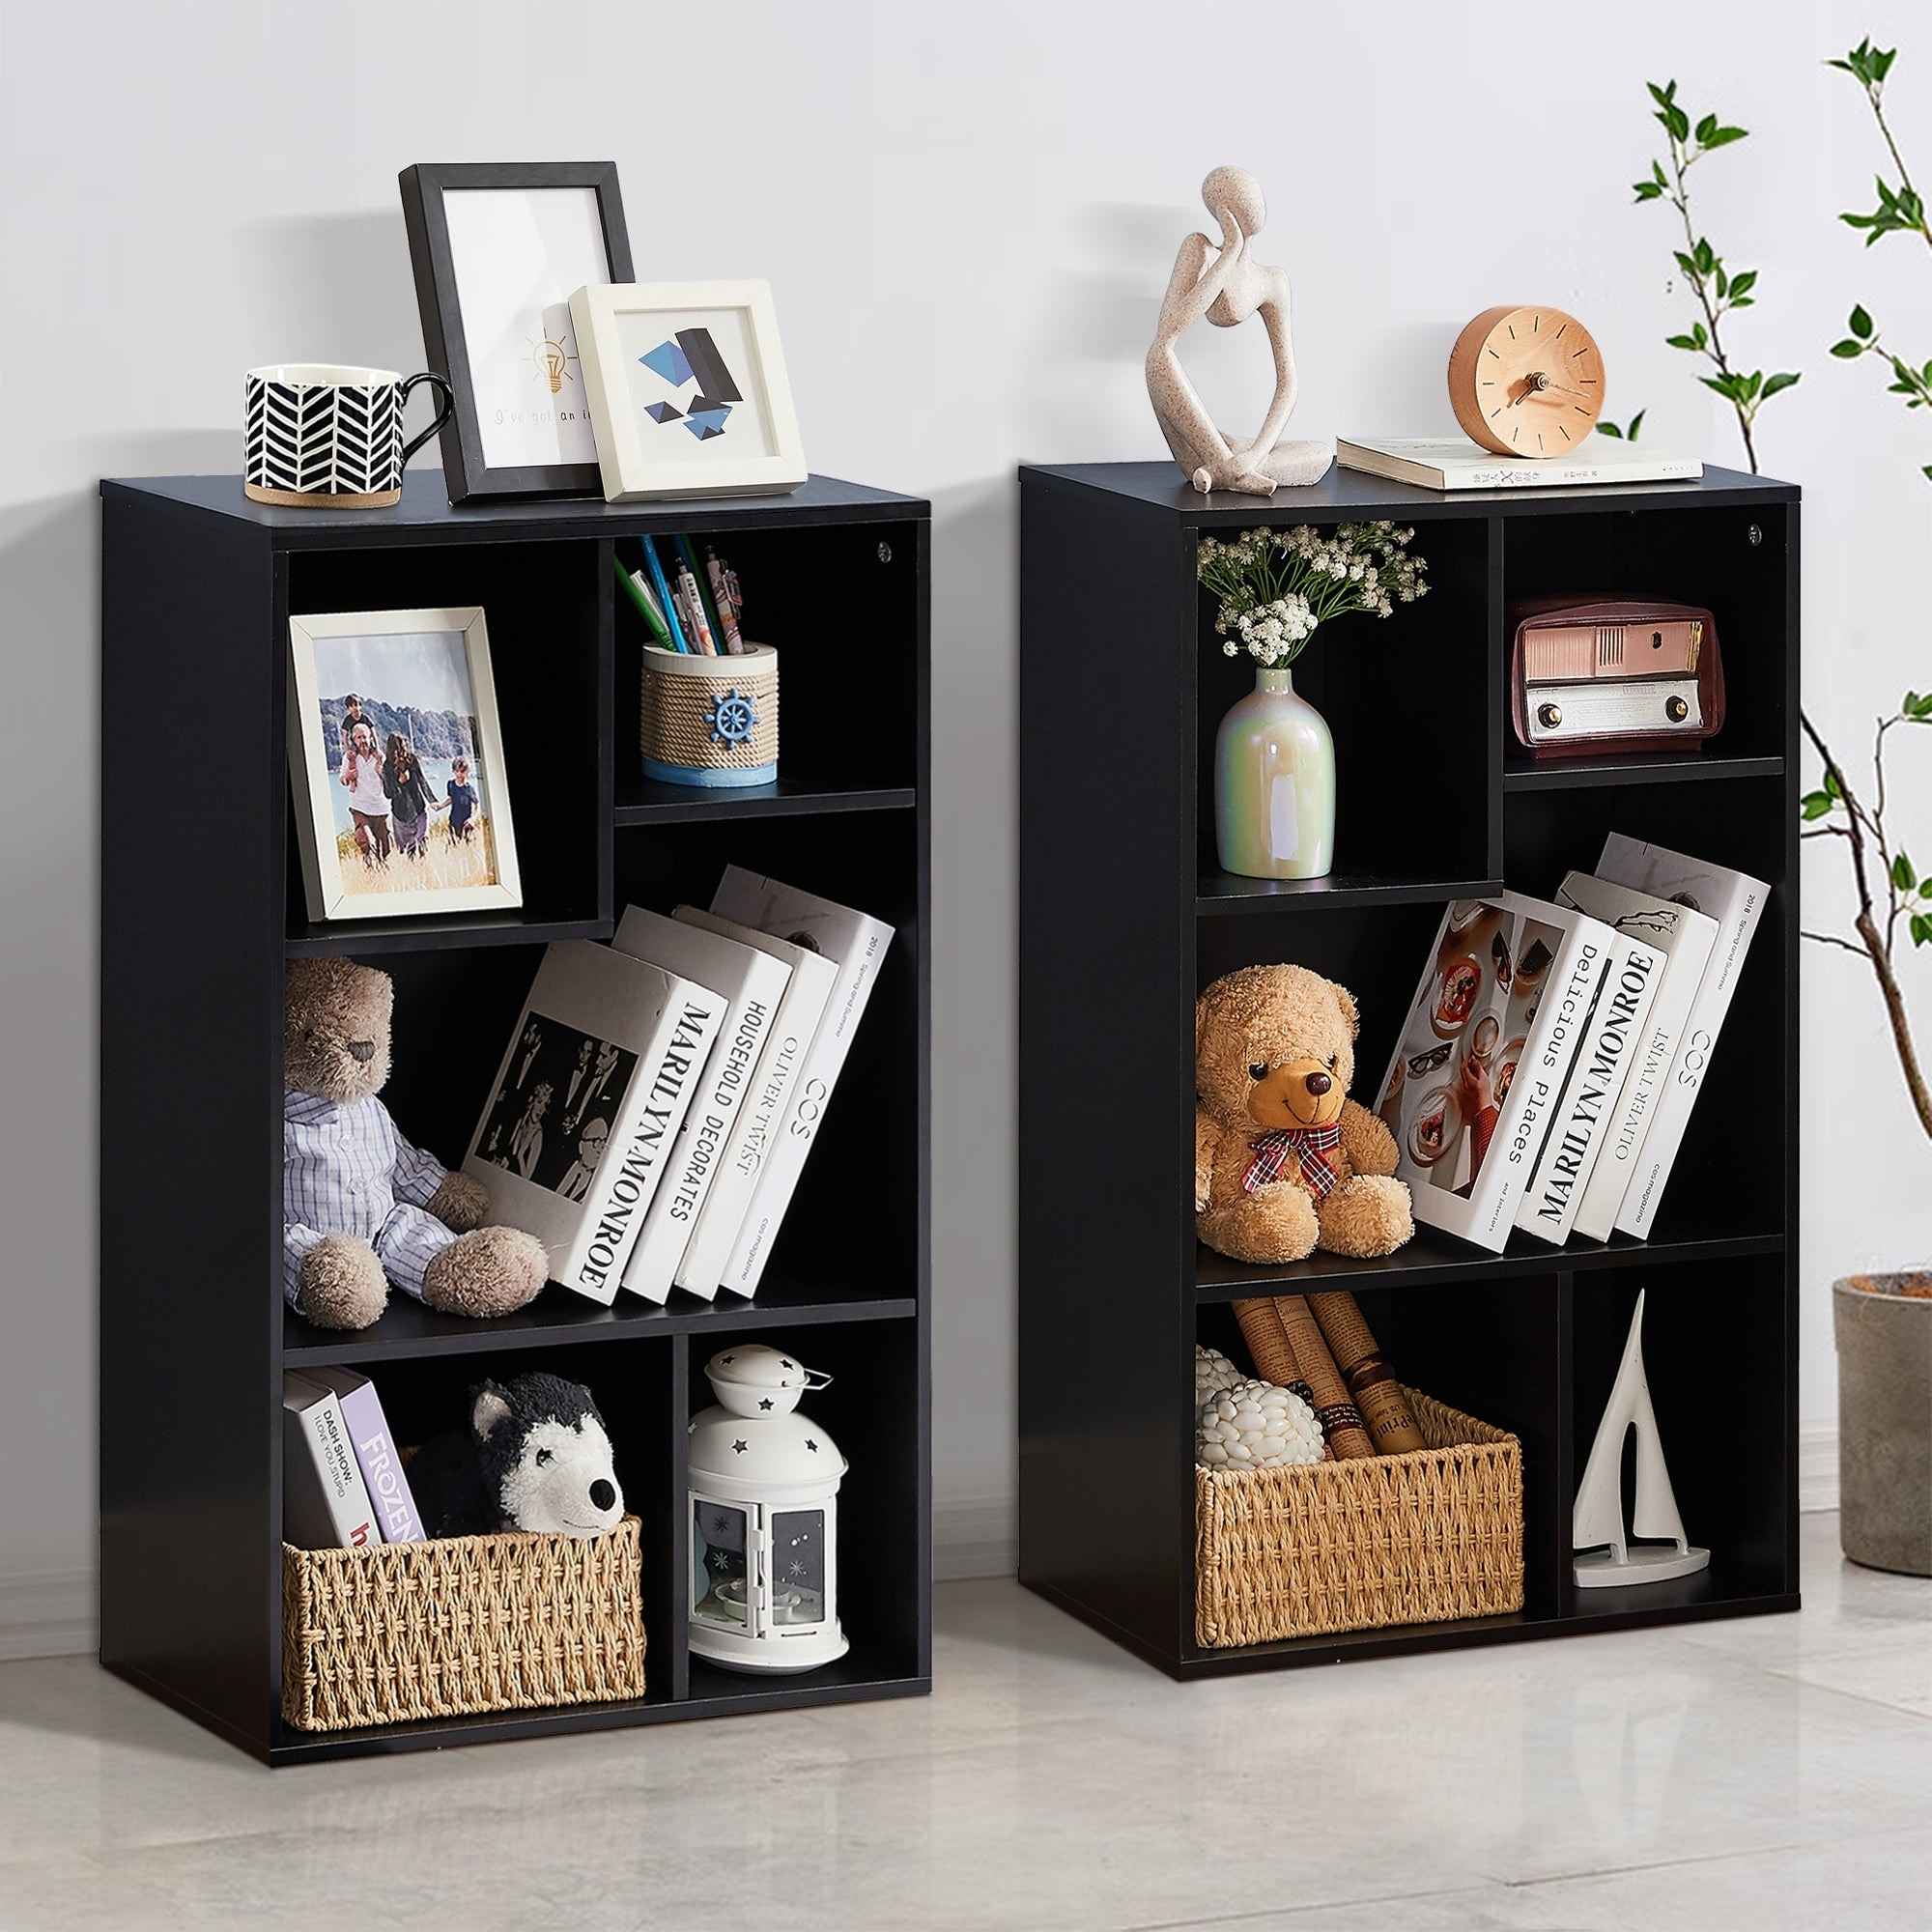 https://ak1.ostkcdn.com/images/products/is/images/direct/968c5d025f9c38cde67b5d086065bc99fdcc1d73/4-Tier-Bookshelf%2C-Set-of-2-Tall-Bookcase-Shelf-Storage-Organizer%2C-Modern-Book-Shelf-for-Bedroom%2C-Living-Room-and-Home-Office.jpg